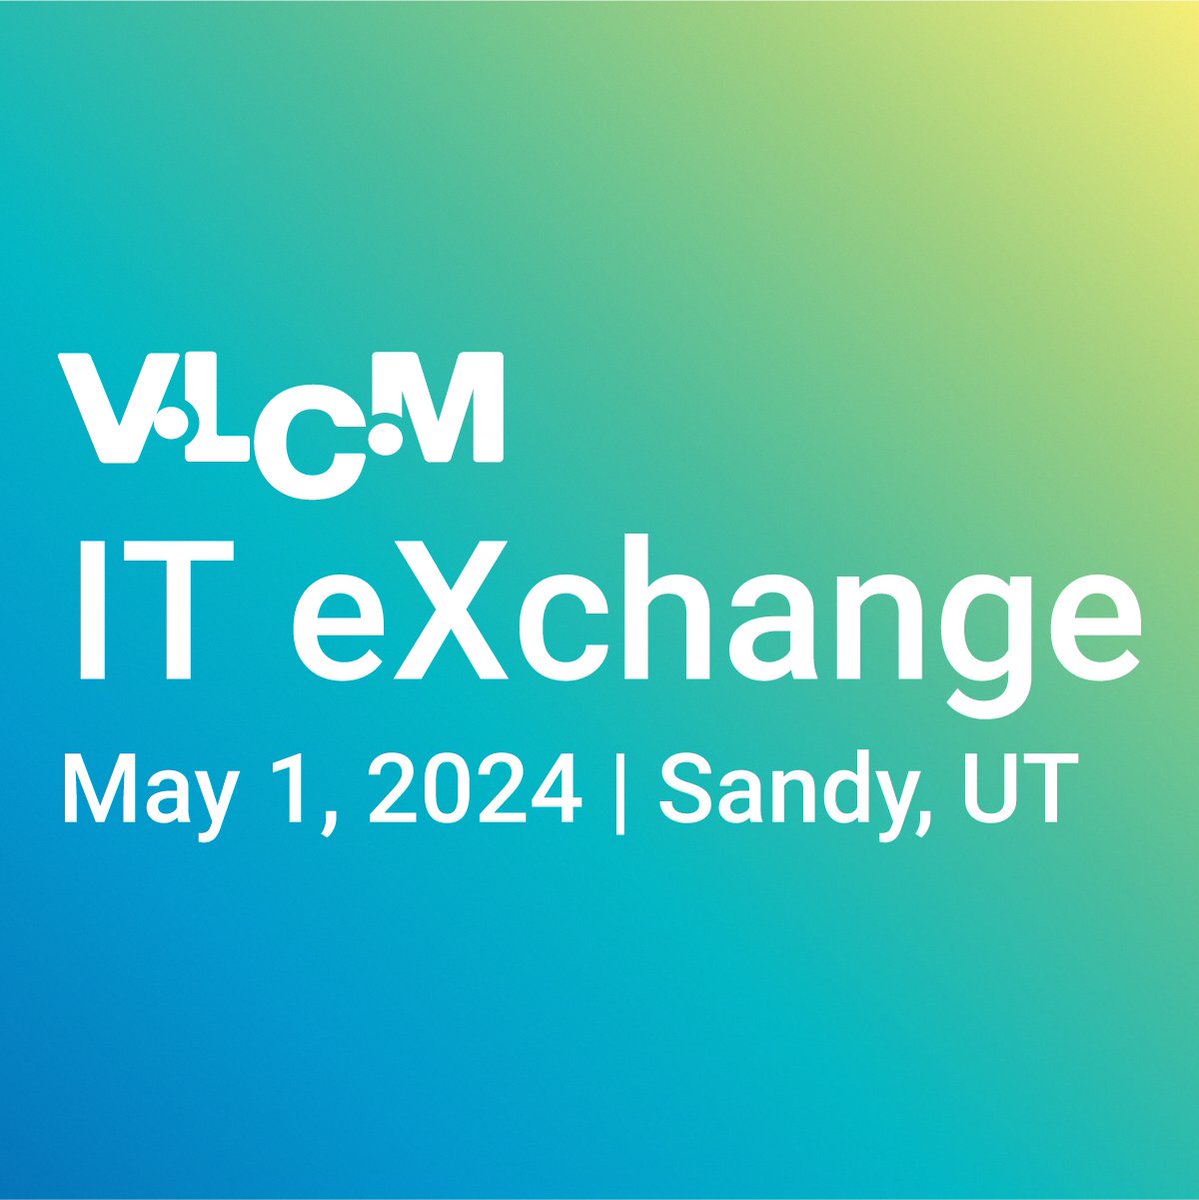 We are thrilled to be sponsoring the @VLCM IT eXchange! #gettingITright. Come visit our booth on May 1st at the Mountain America Expo Center. 8 am - 3:30pm 🎉 We can't wait to connect with you & discuss how we can help take your business to the next level. #VLCMITExchange